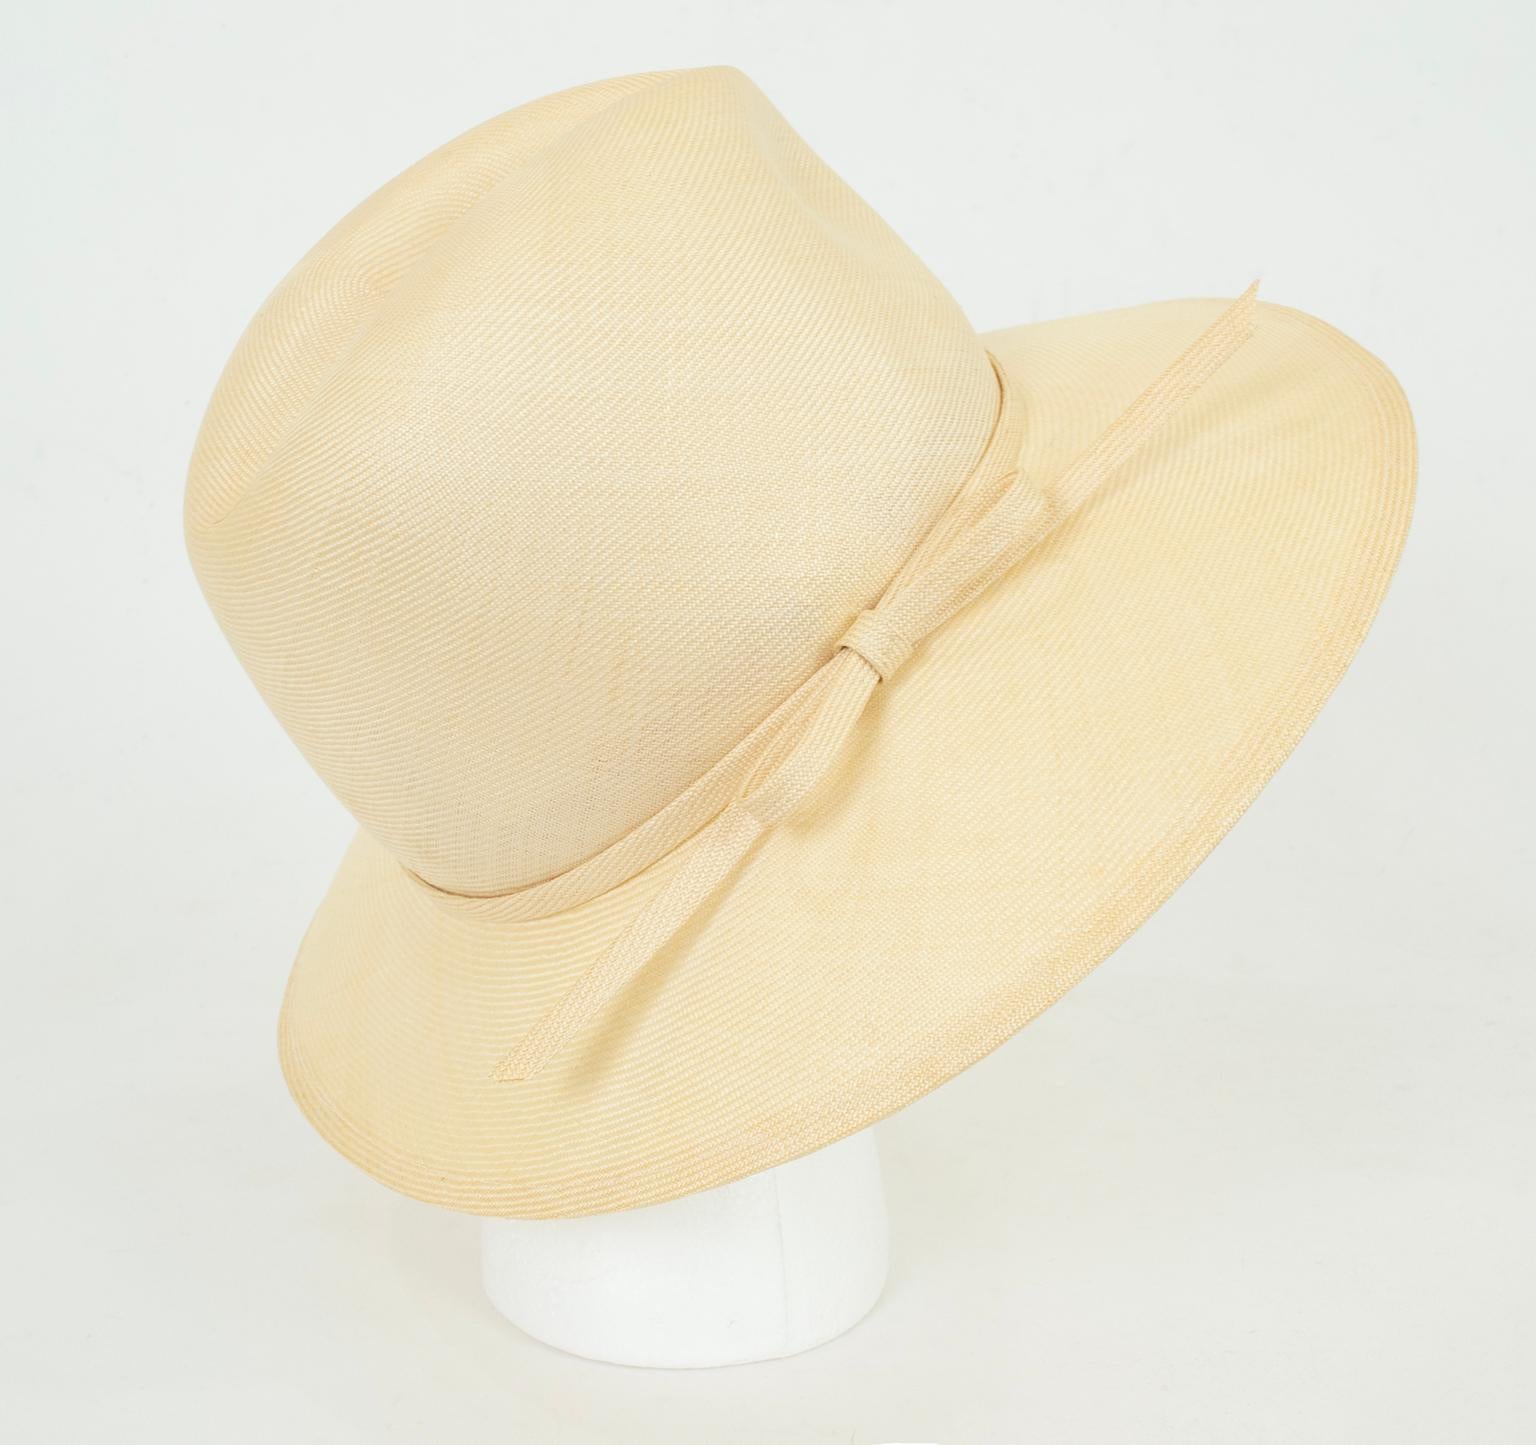 Never worn in its original box, this 70-year-old hat is still as modern, relevant and chic as it was when it was first made. Fashioned of ultra-lightweight, tightly-woven ivory straw, it features a traditional Panama crown with an extra wide,